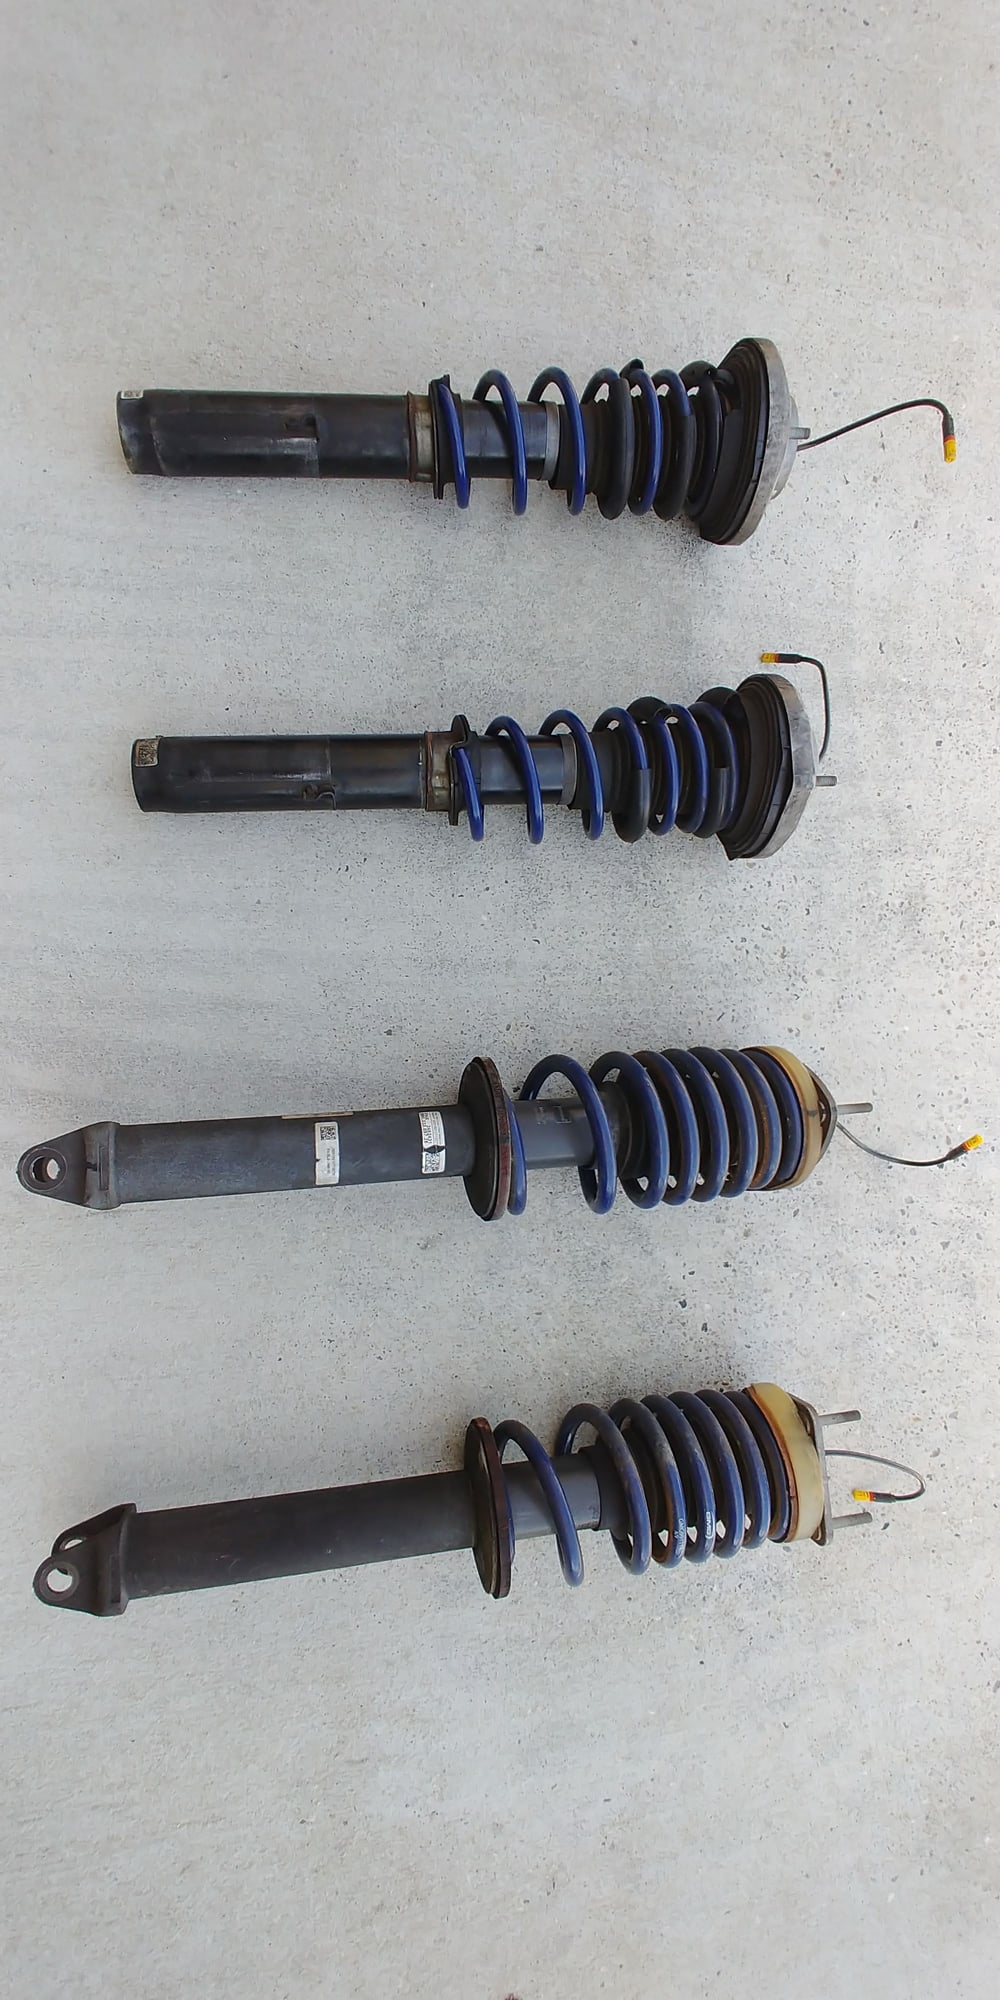 Steering/Suspension - GMG lowering springs and EDC strut assembly (4) - Used - 2012 to 2019 Porsche GT2 - 2012 to 2019 Porsche GT3 - 2012 to 2019 Porsche 911 - 2012 to 2019 Porsche Carrera - Ocean Springs, MS 39564, United States